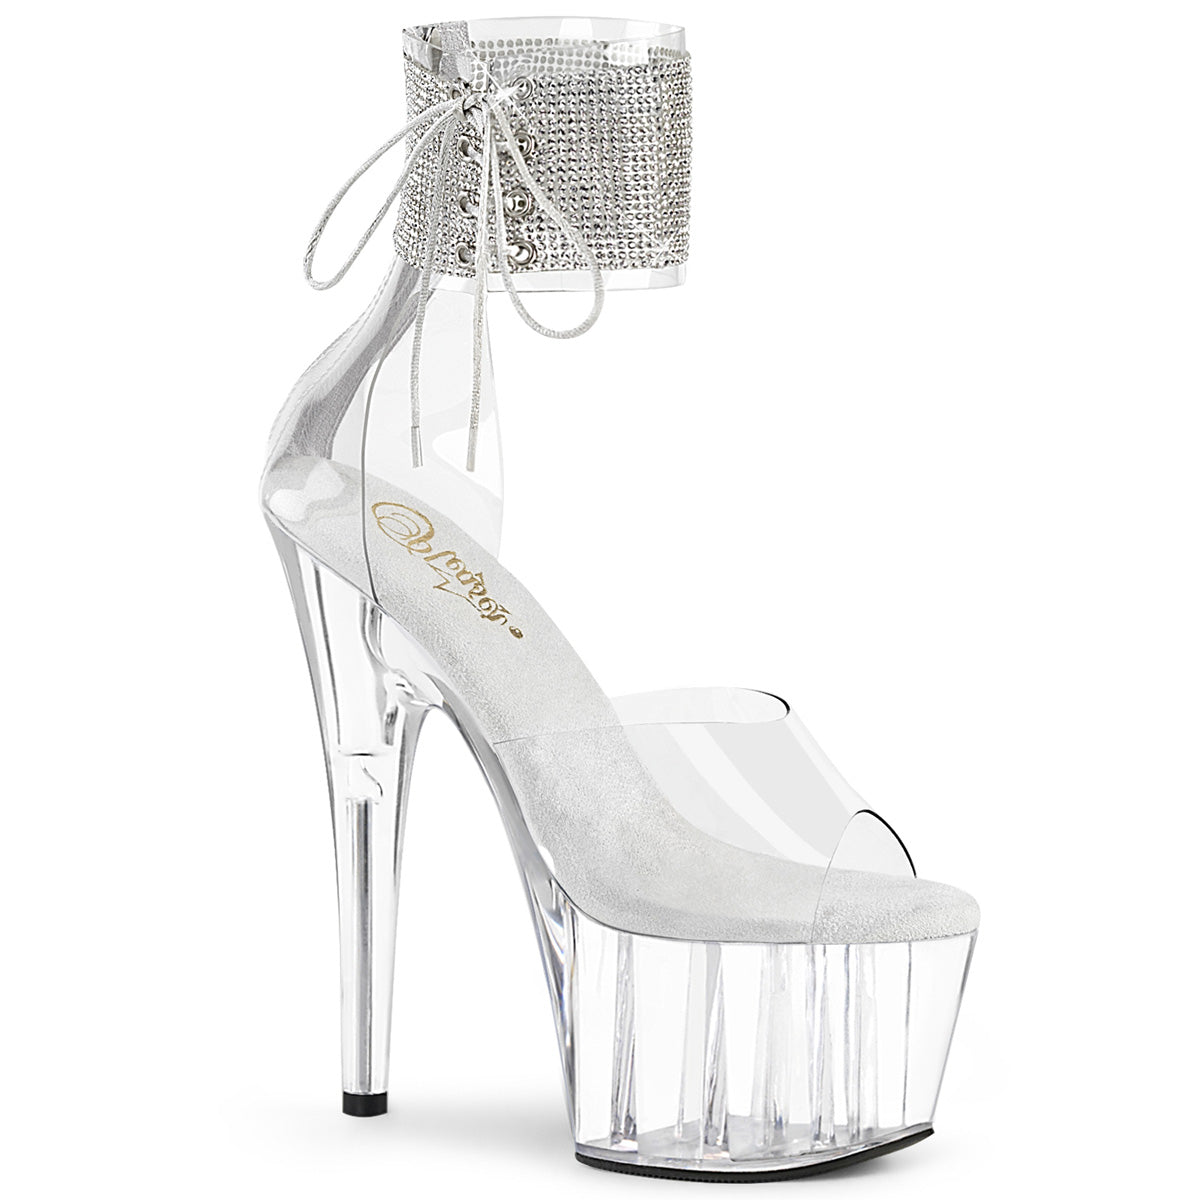 ADORE-724RS Pleasers 7 Inch Clear Exotic Dancing  Bling Ankle Cuff Heels